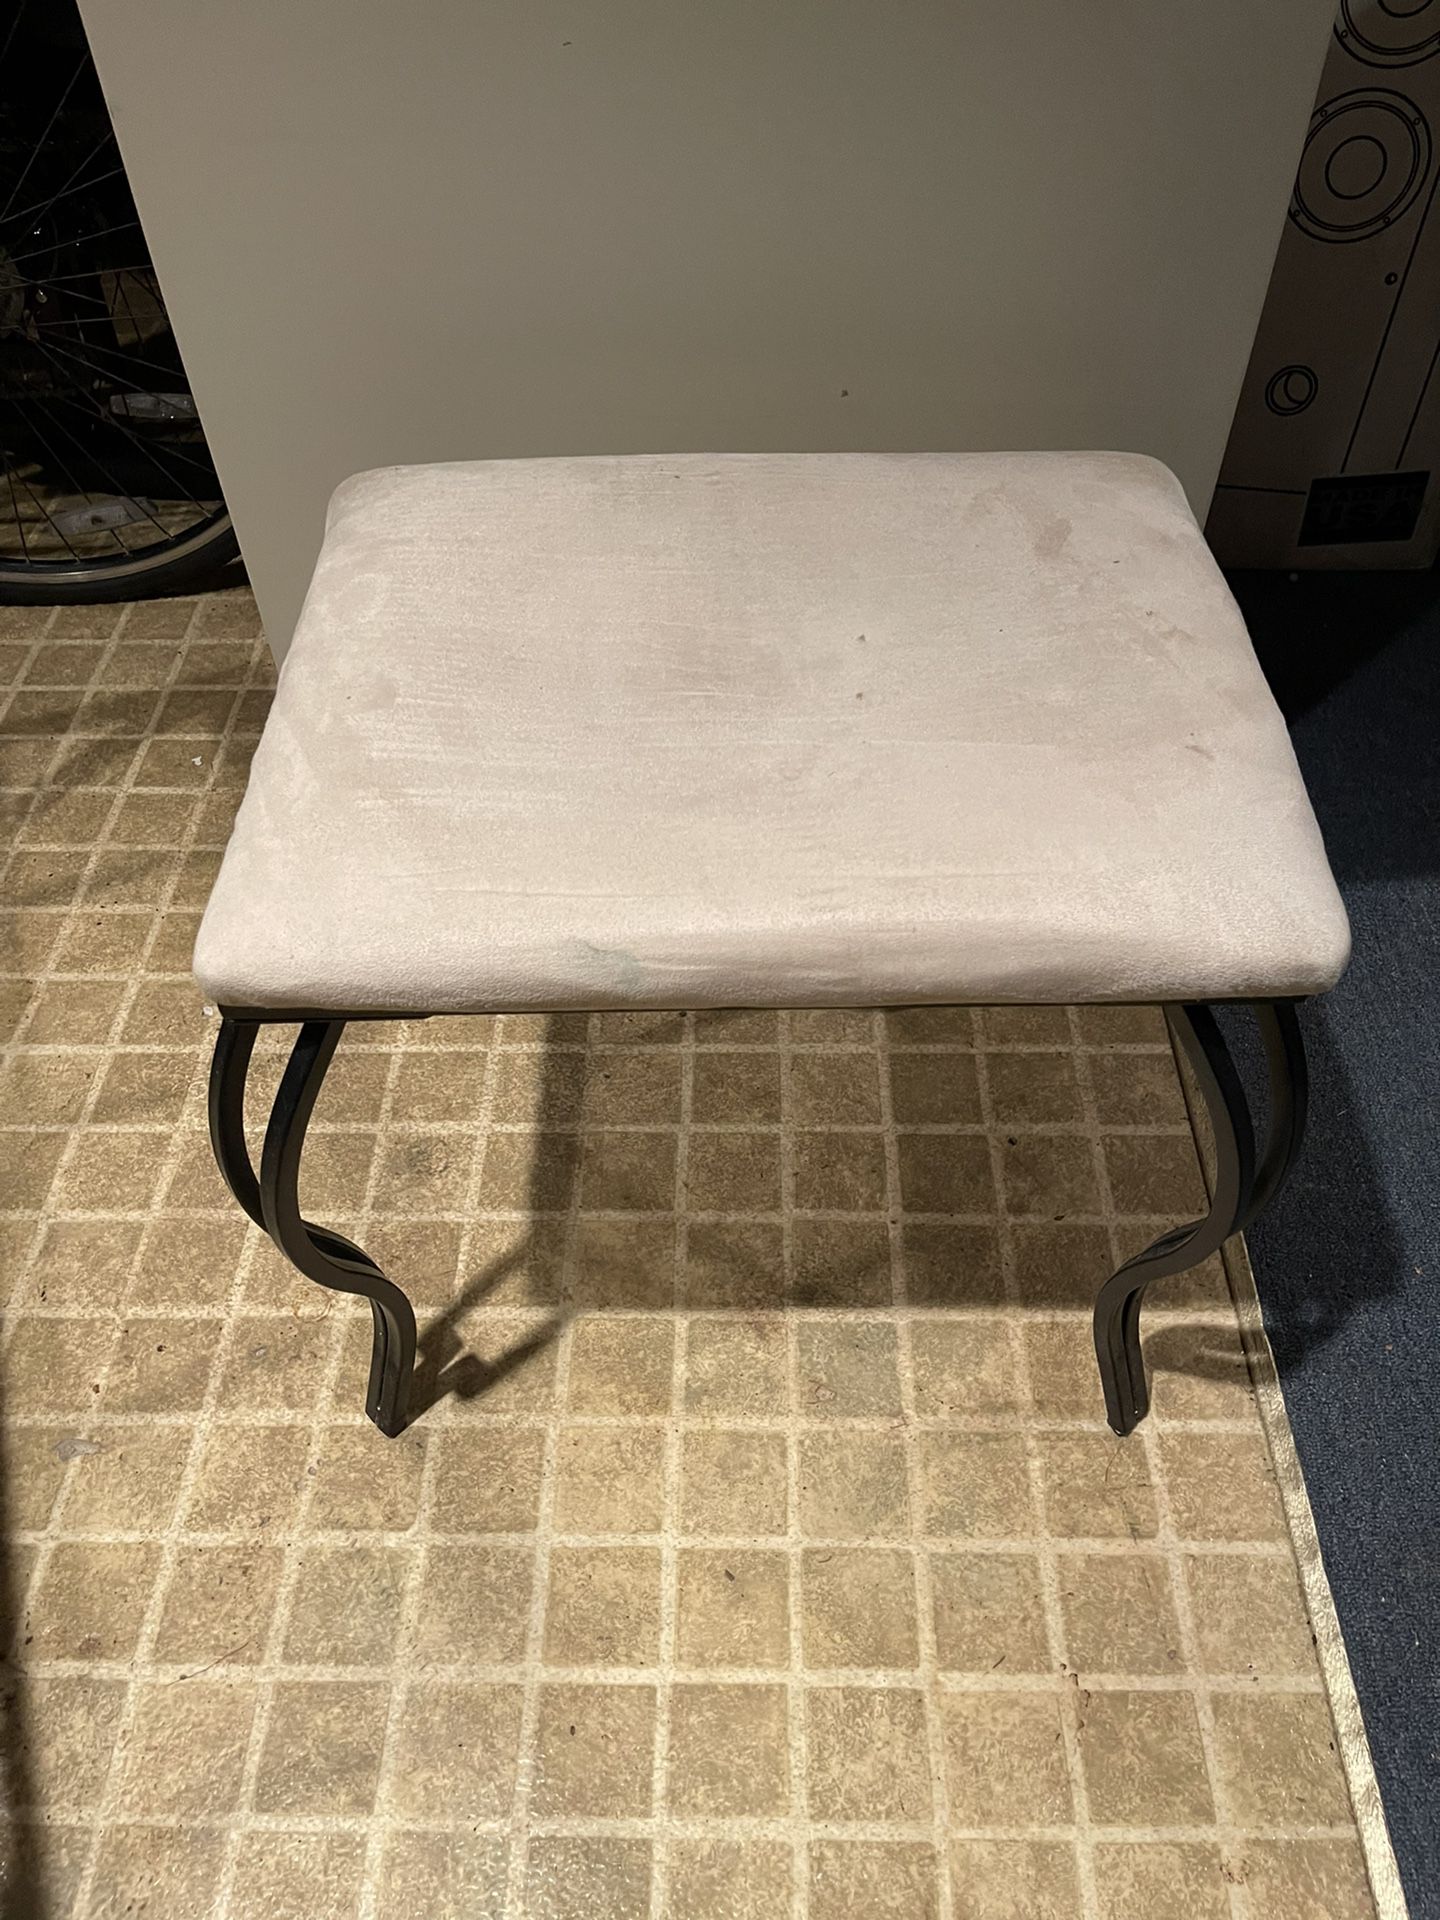 Metal Stool With Cloth Top